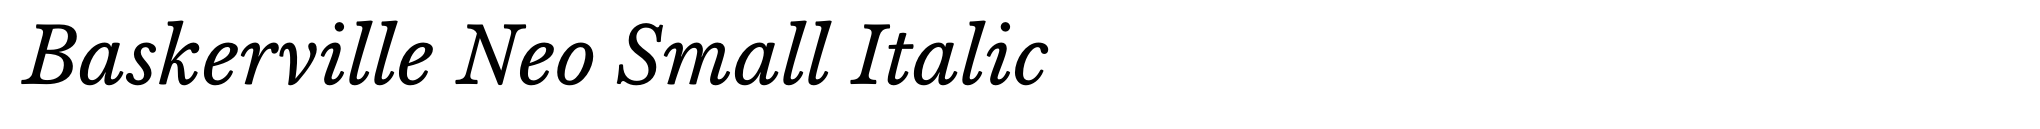 Baskerville Neo Small Italic image